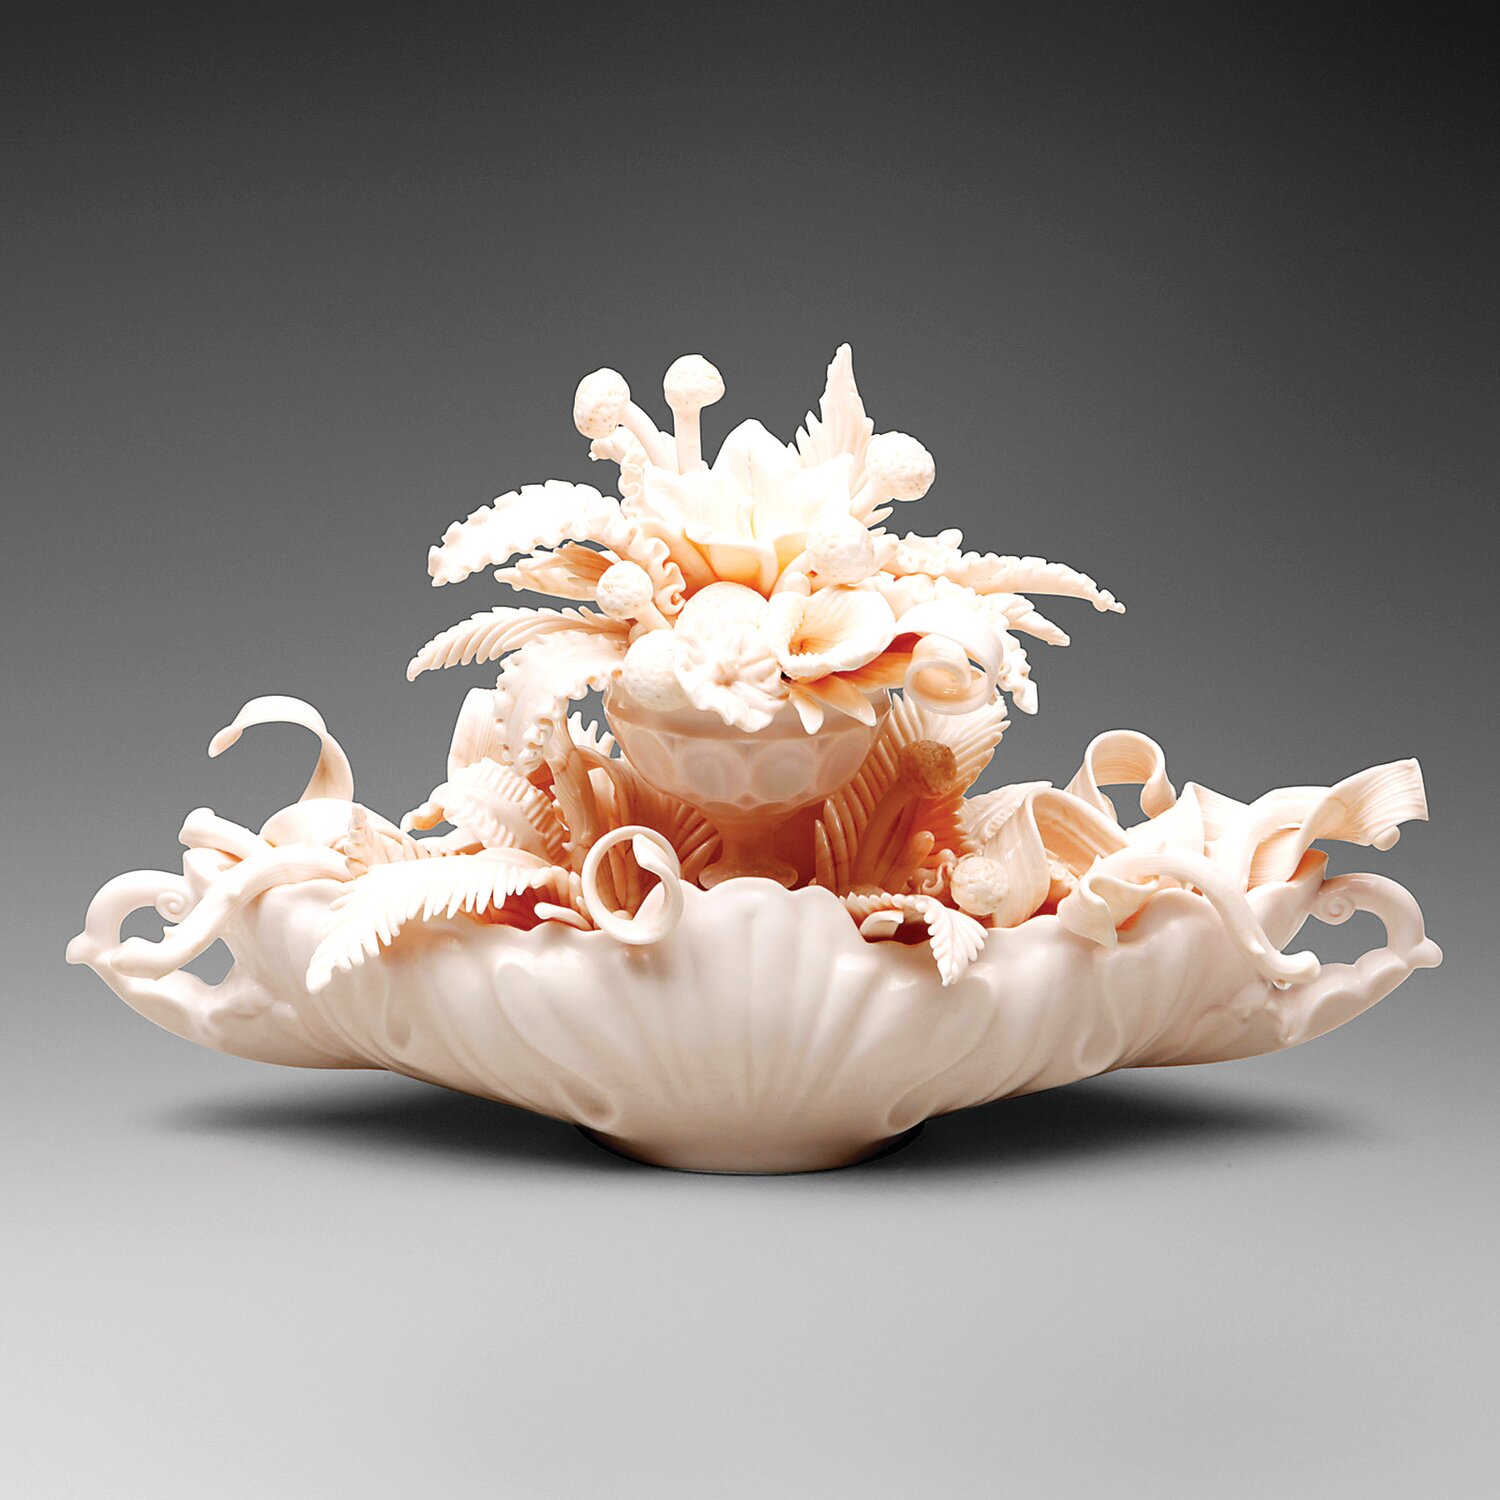 Amber Cowan’s “Gondola and Sherbert in Shell” is part of a benefit lot featured in the Modern Design auction.